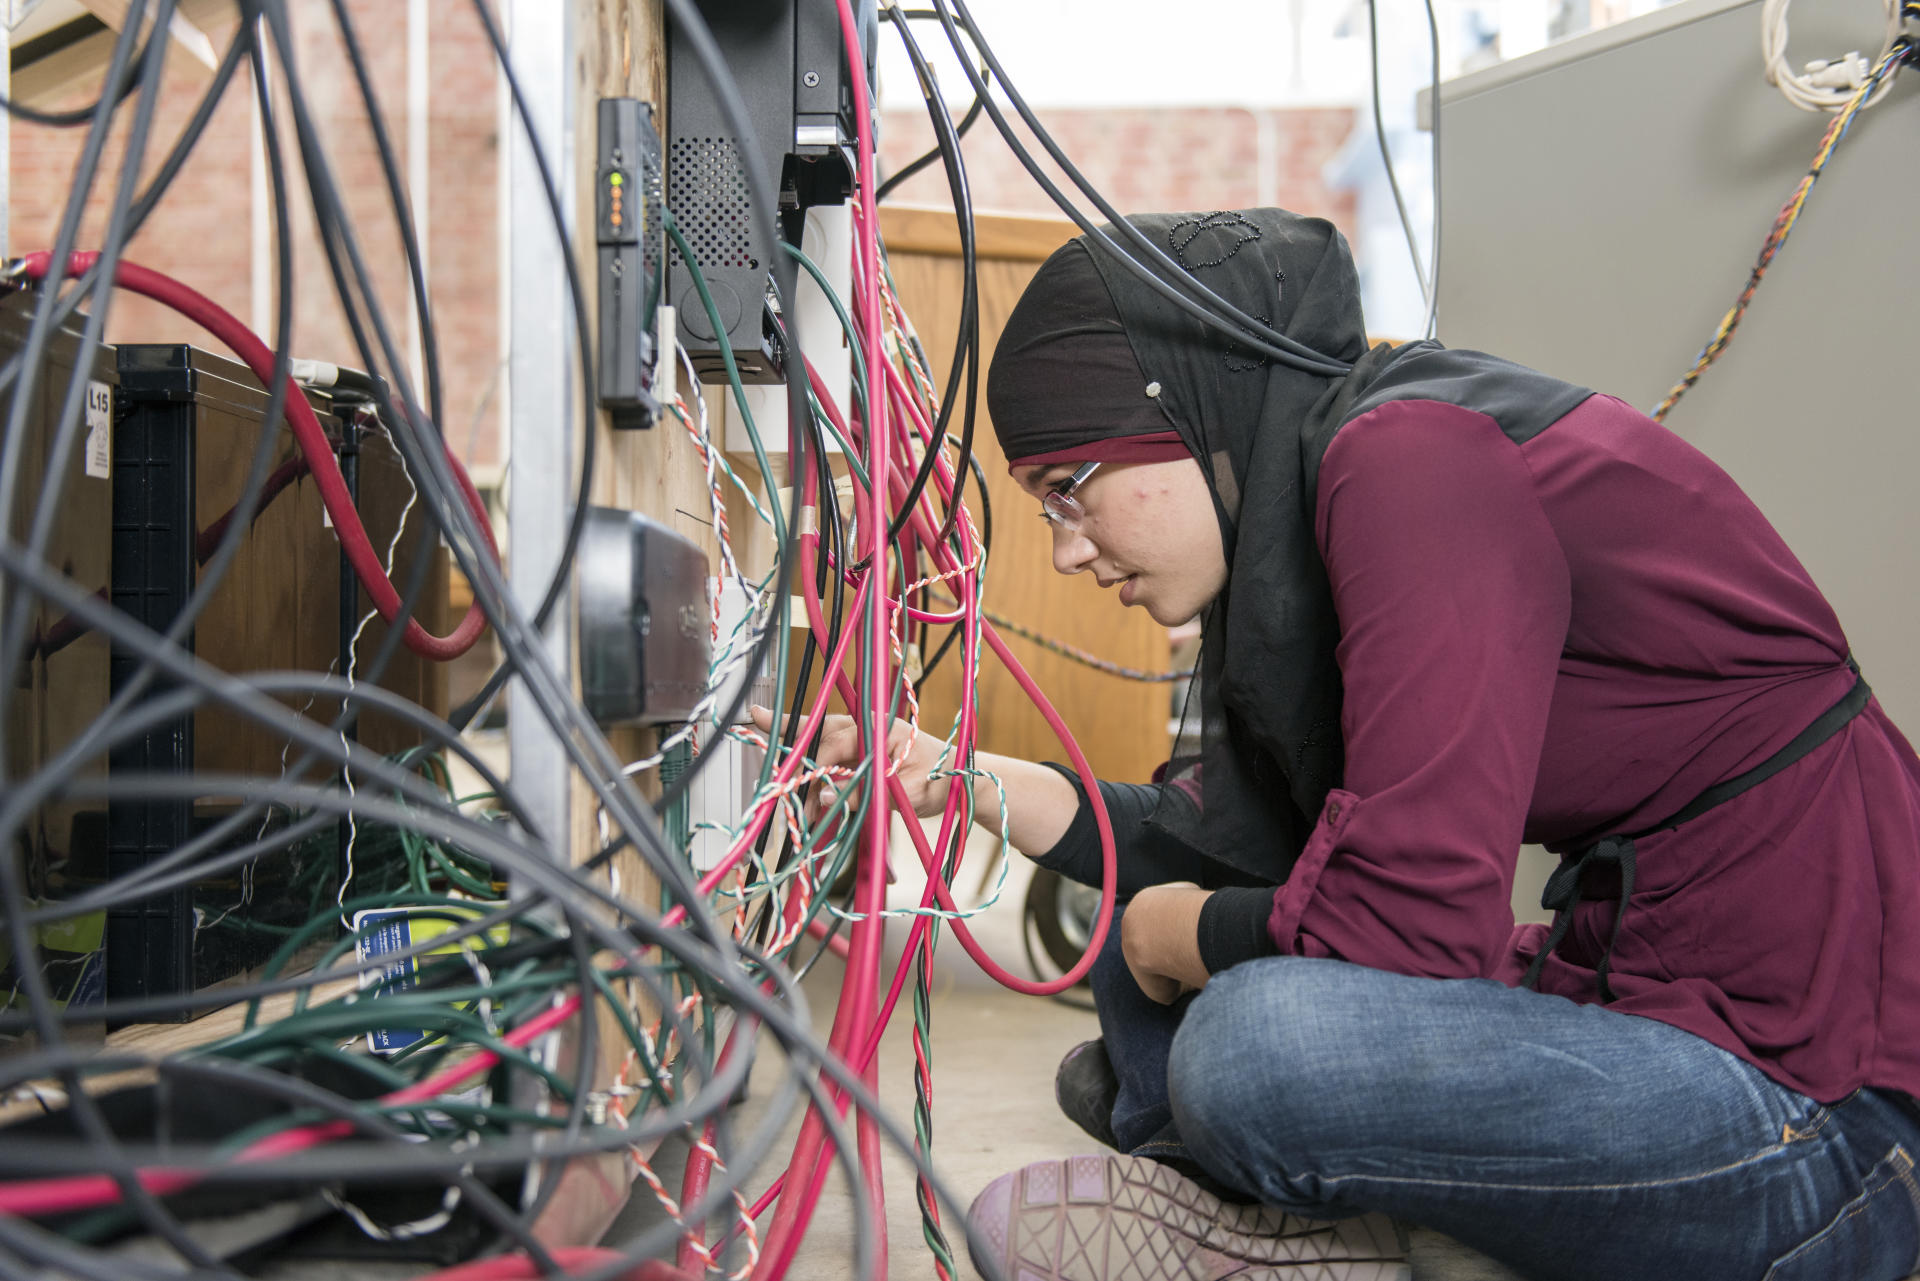 Salam Ali runs tests on her solar charging station in Langdon Hall on Thursday, April 21, 2016 in Chico, Calif. Ali is a part of Society of Women Engineers, has managed the climbing wall at the WREC, held/organized Muslim events on campus, and is participating in Capstone Engineering Project program. (Jason Halley/University Photographer)